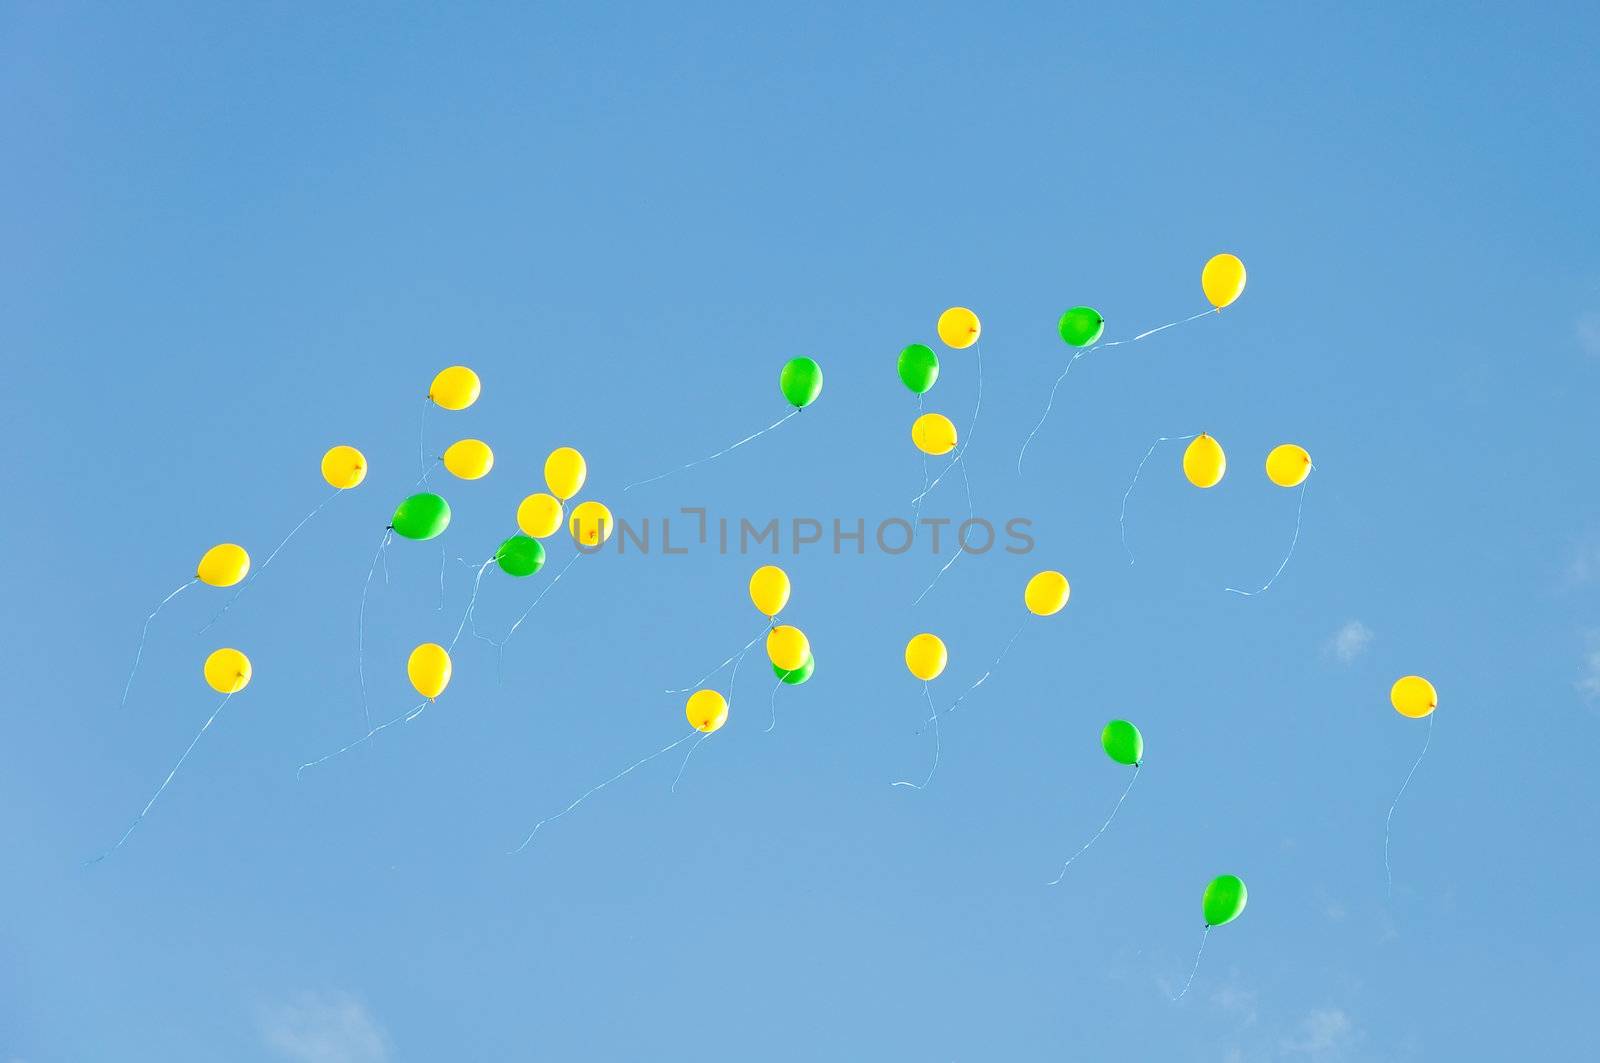 flight yellow and green small balloons